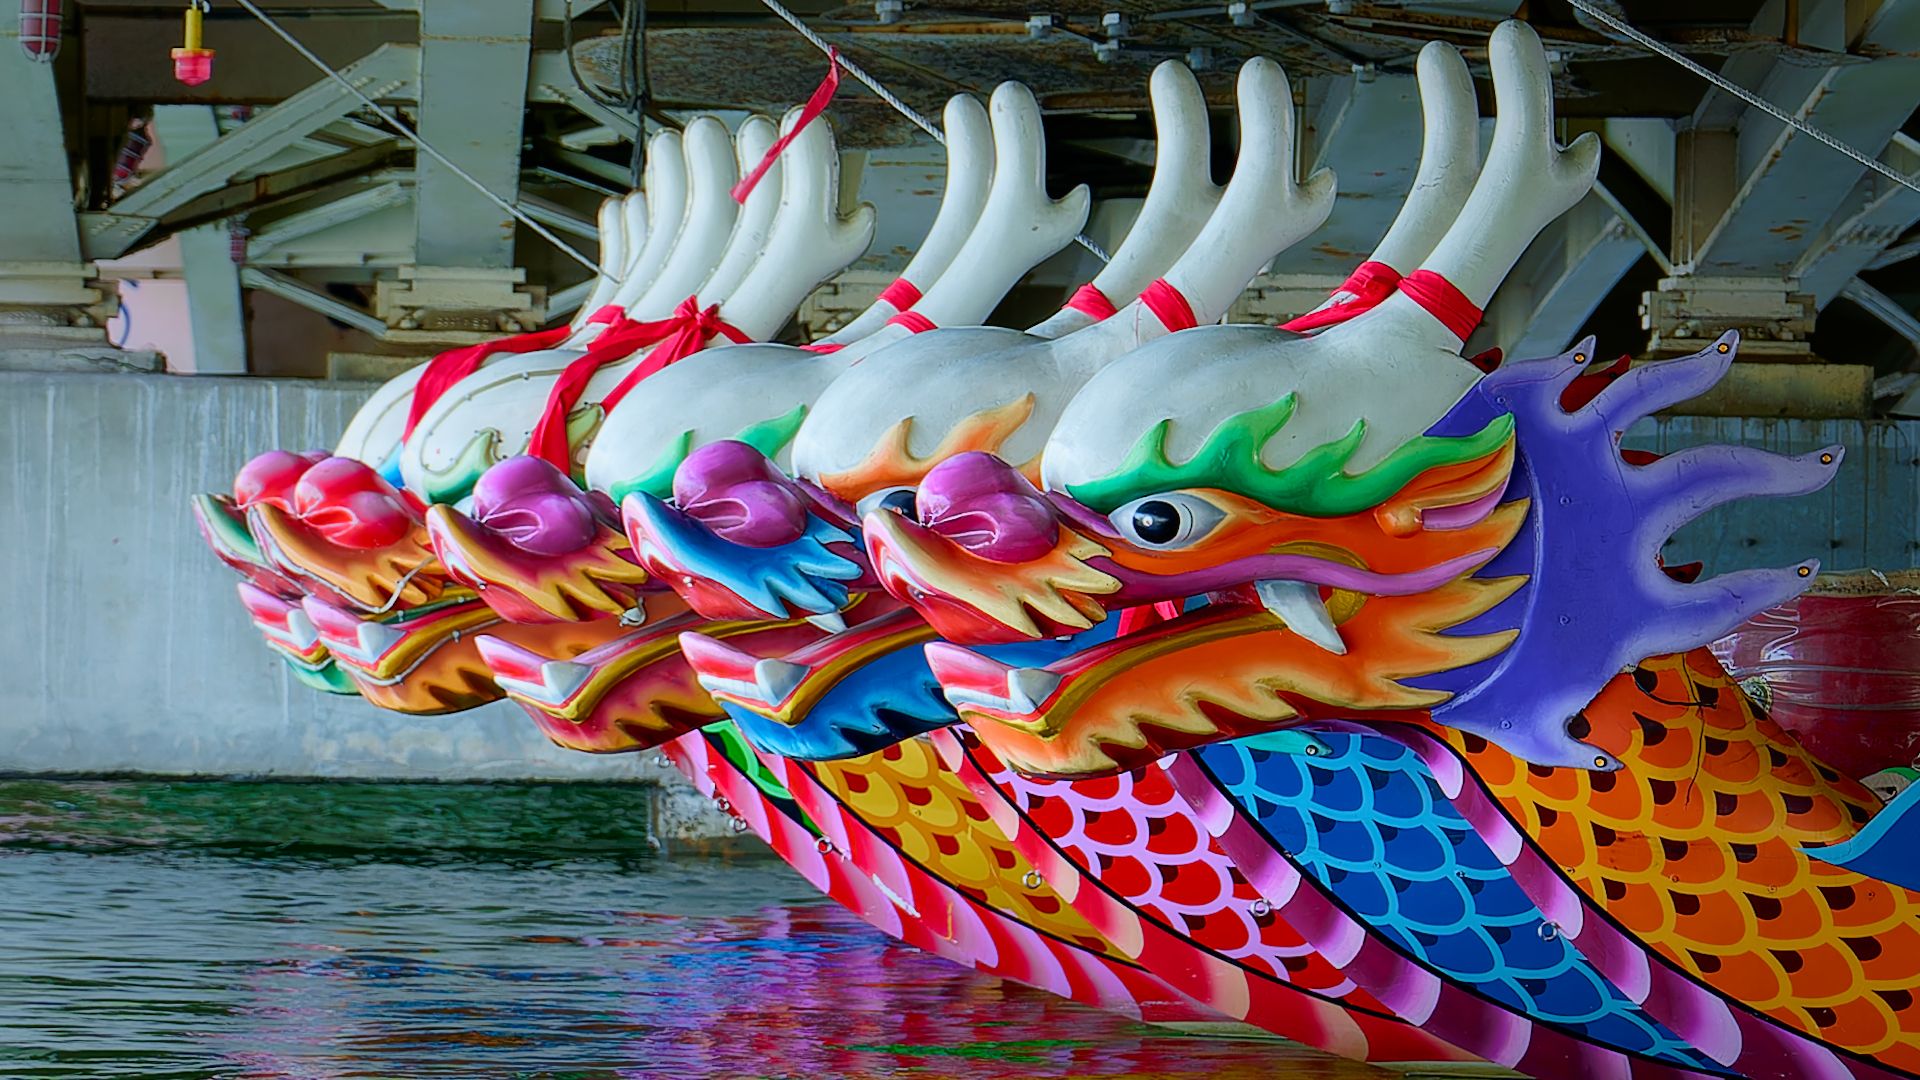 Approximately 10 large dragon boats moored under a bridge.